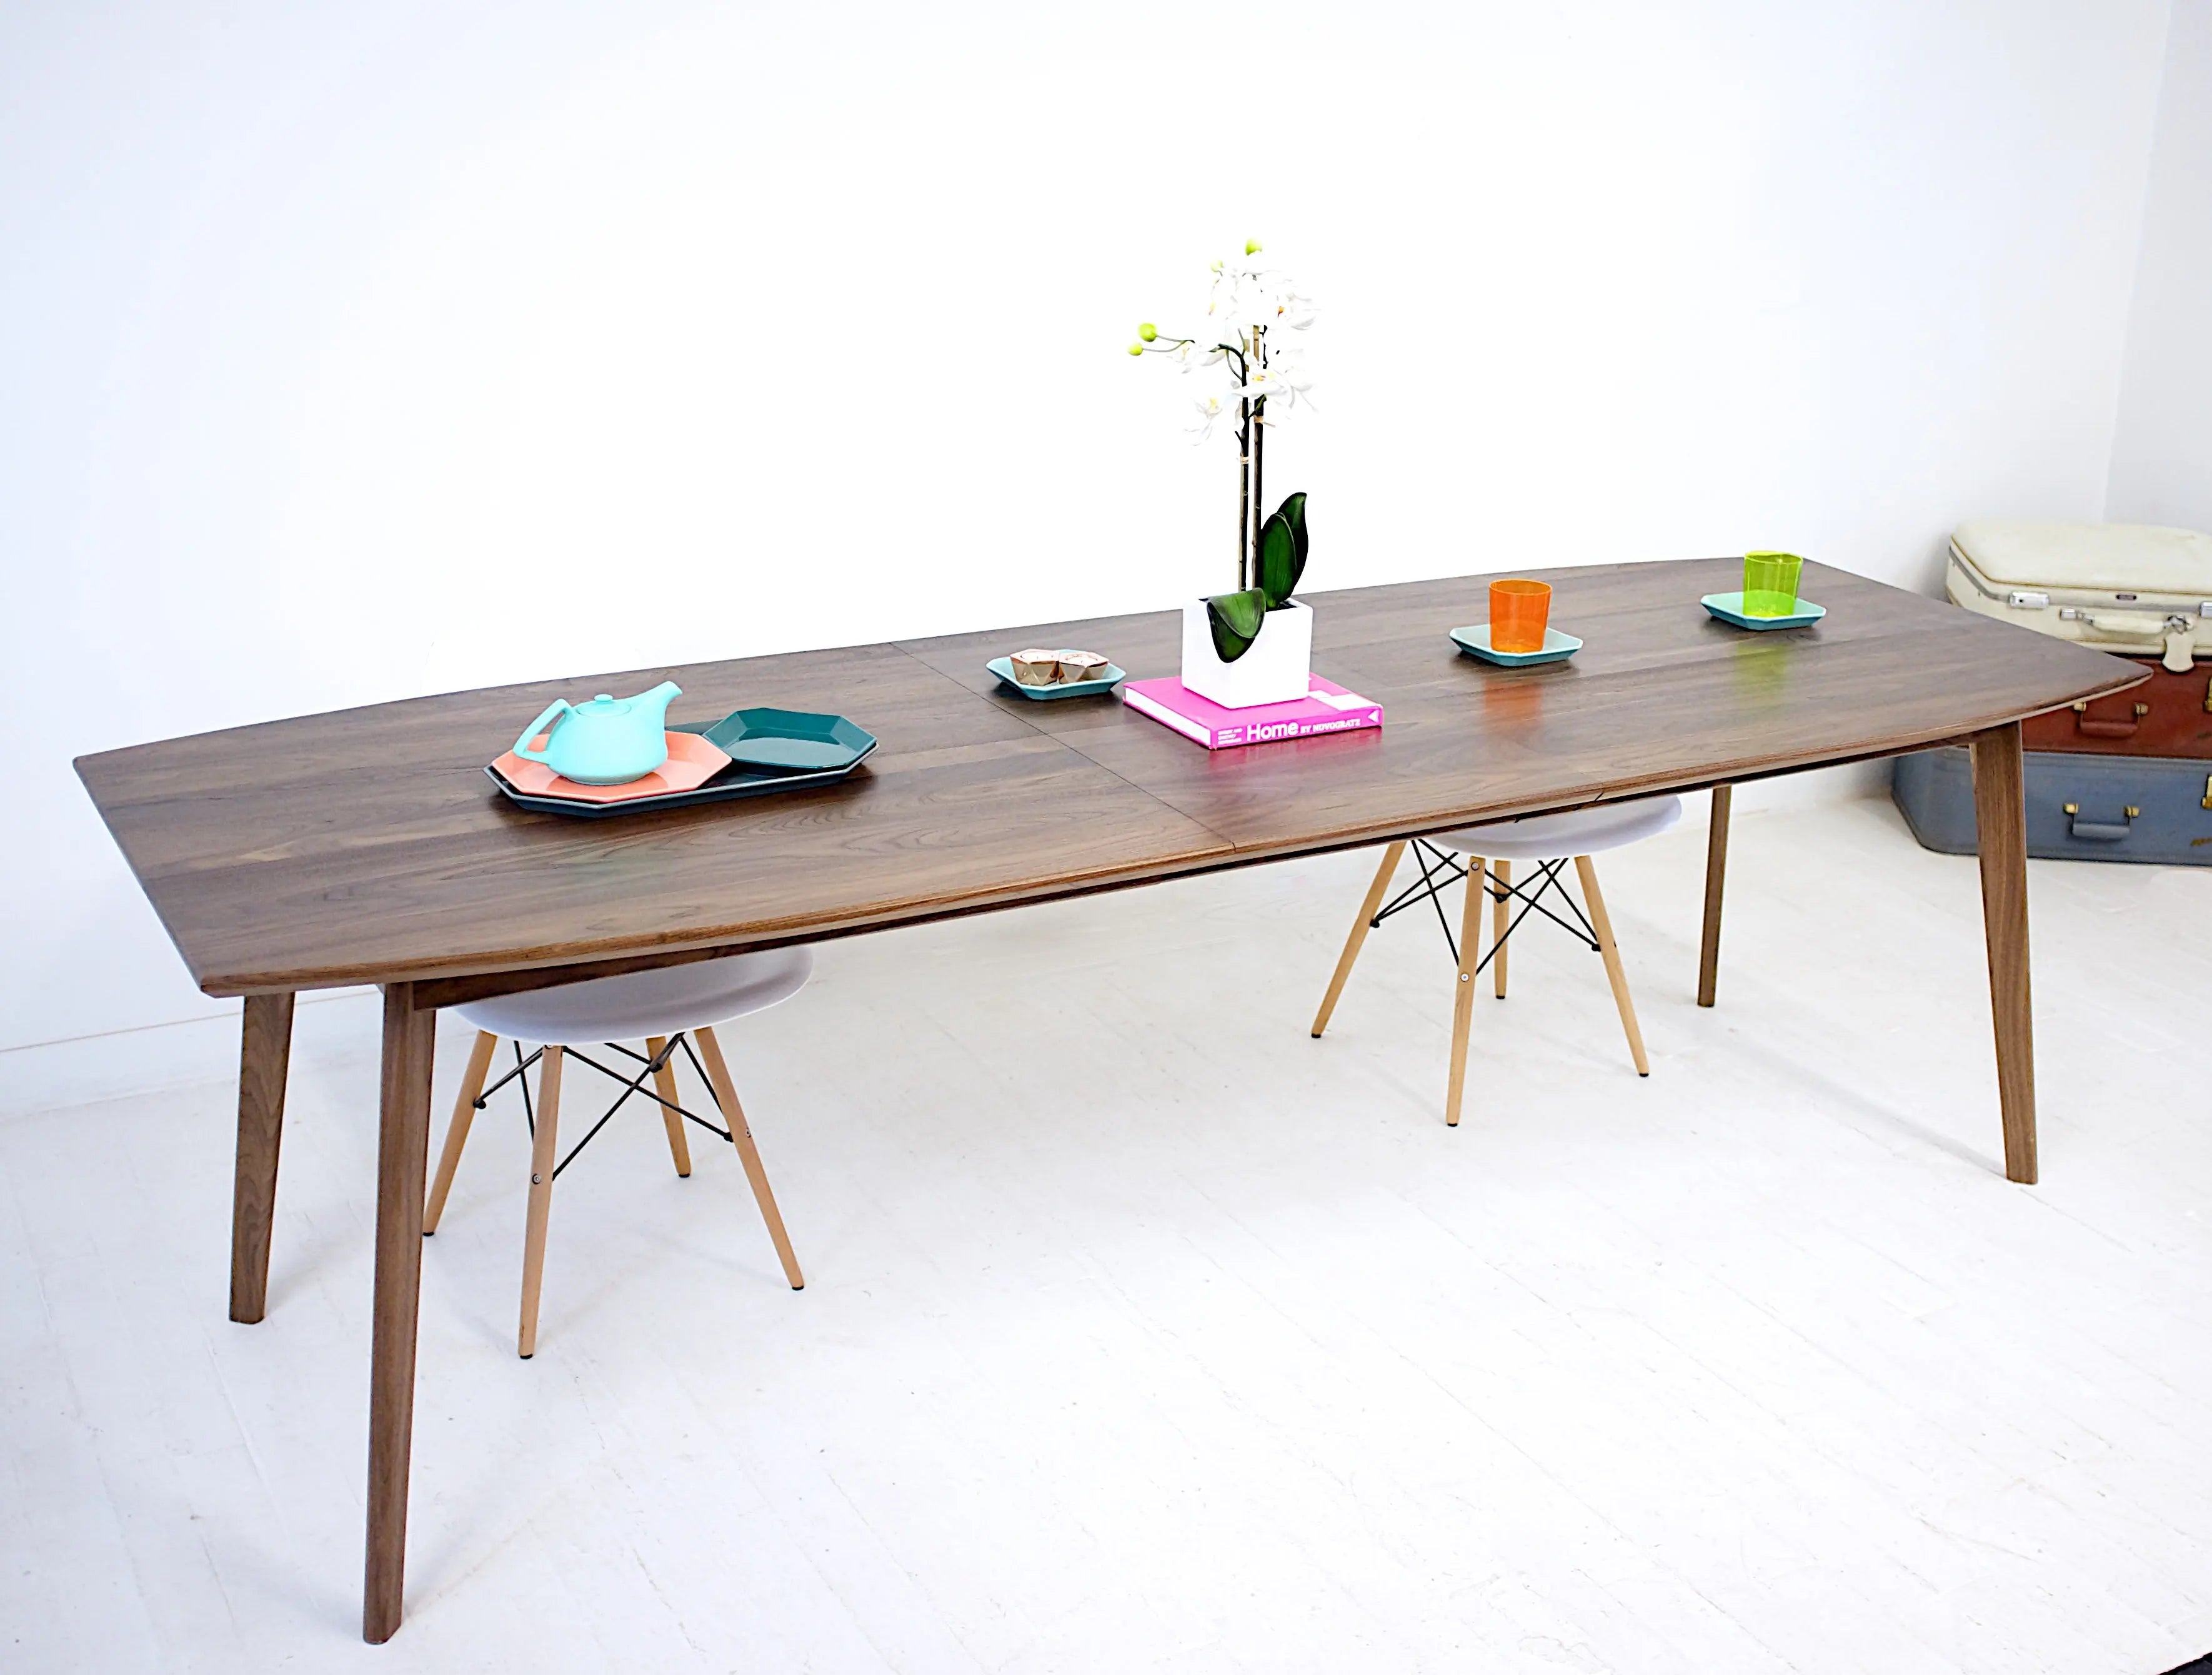 The Santa Monica Extension Table: Classic Mid Century Modern Dining Table Moderncre8ve